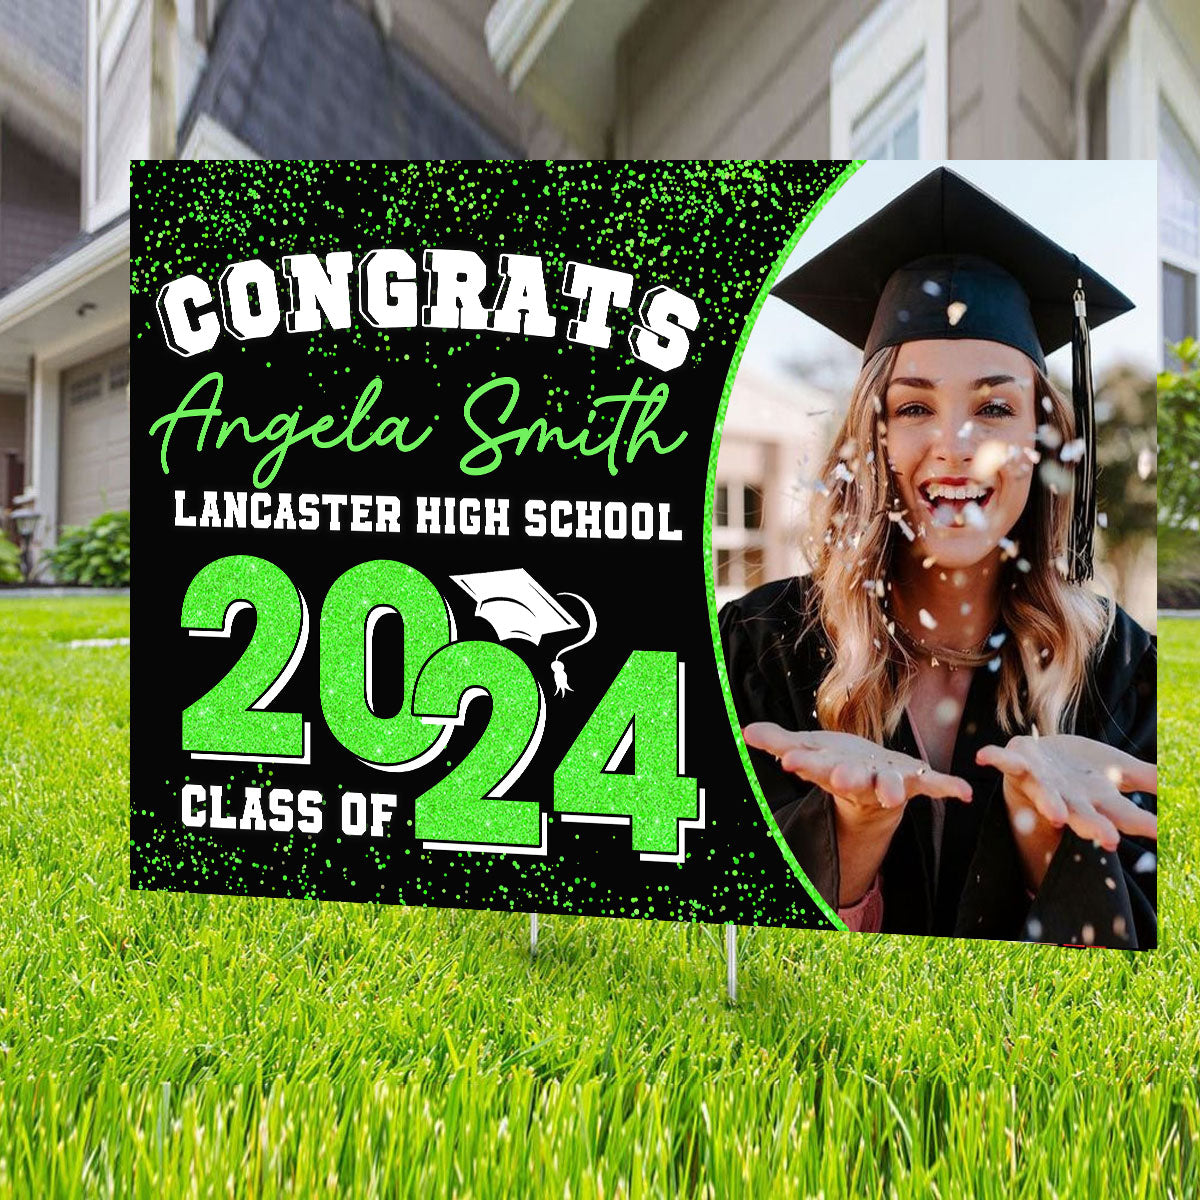 Congrats Class Of 2024, Custom Photo And Text - Personalized Lawn Sign, Yard Sign, Graduation Gift